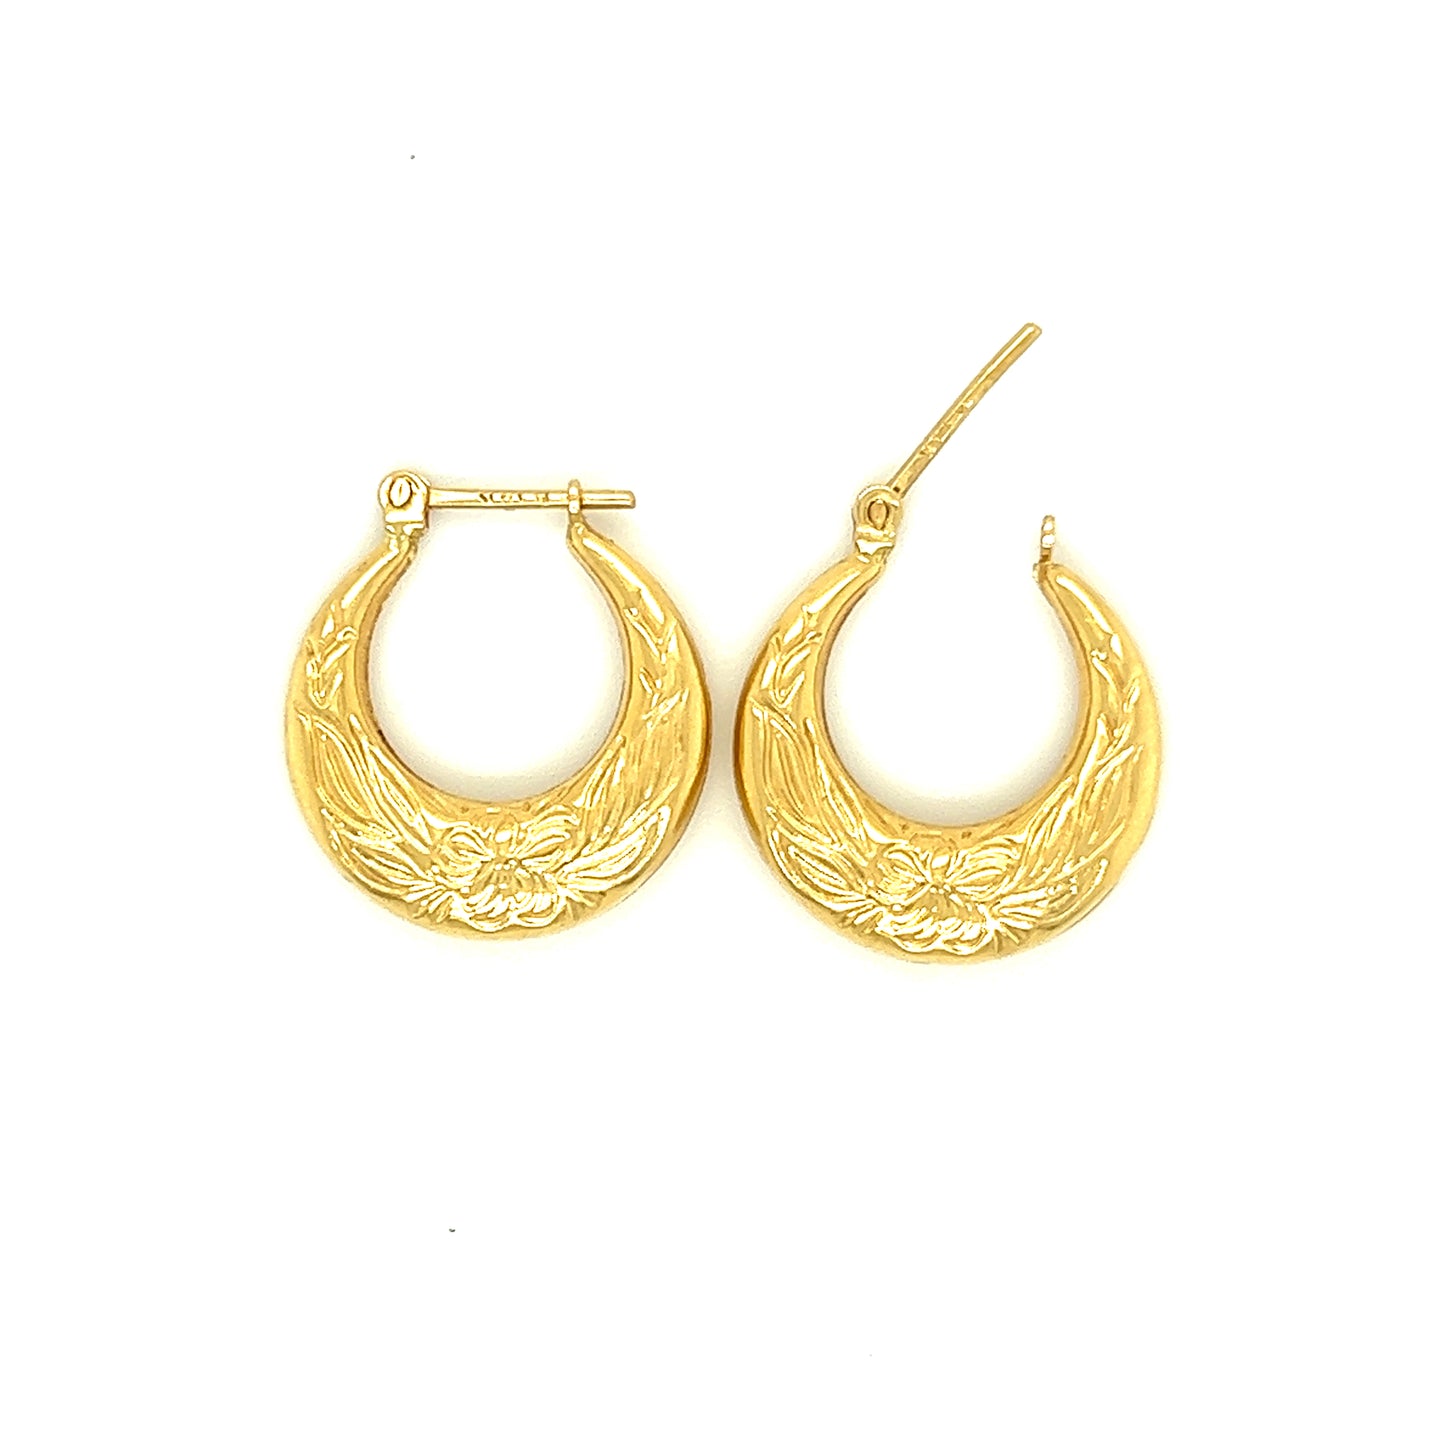 Hoop 18mm Earrings with Flower Engraving in 14K Yellow Gold Top View Open Clasp